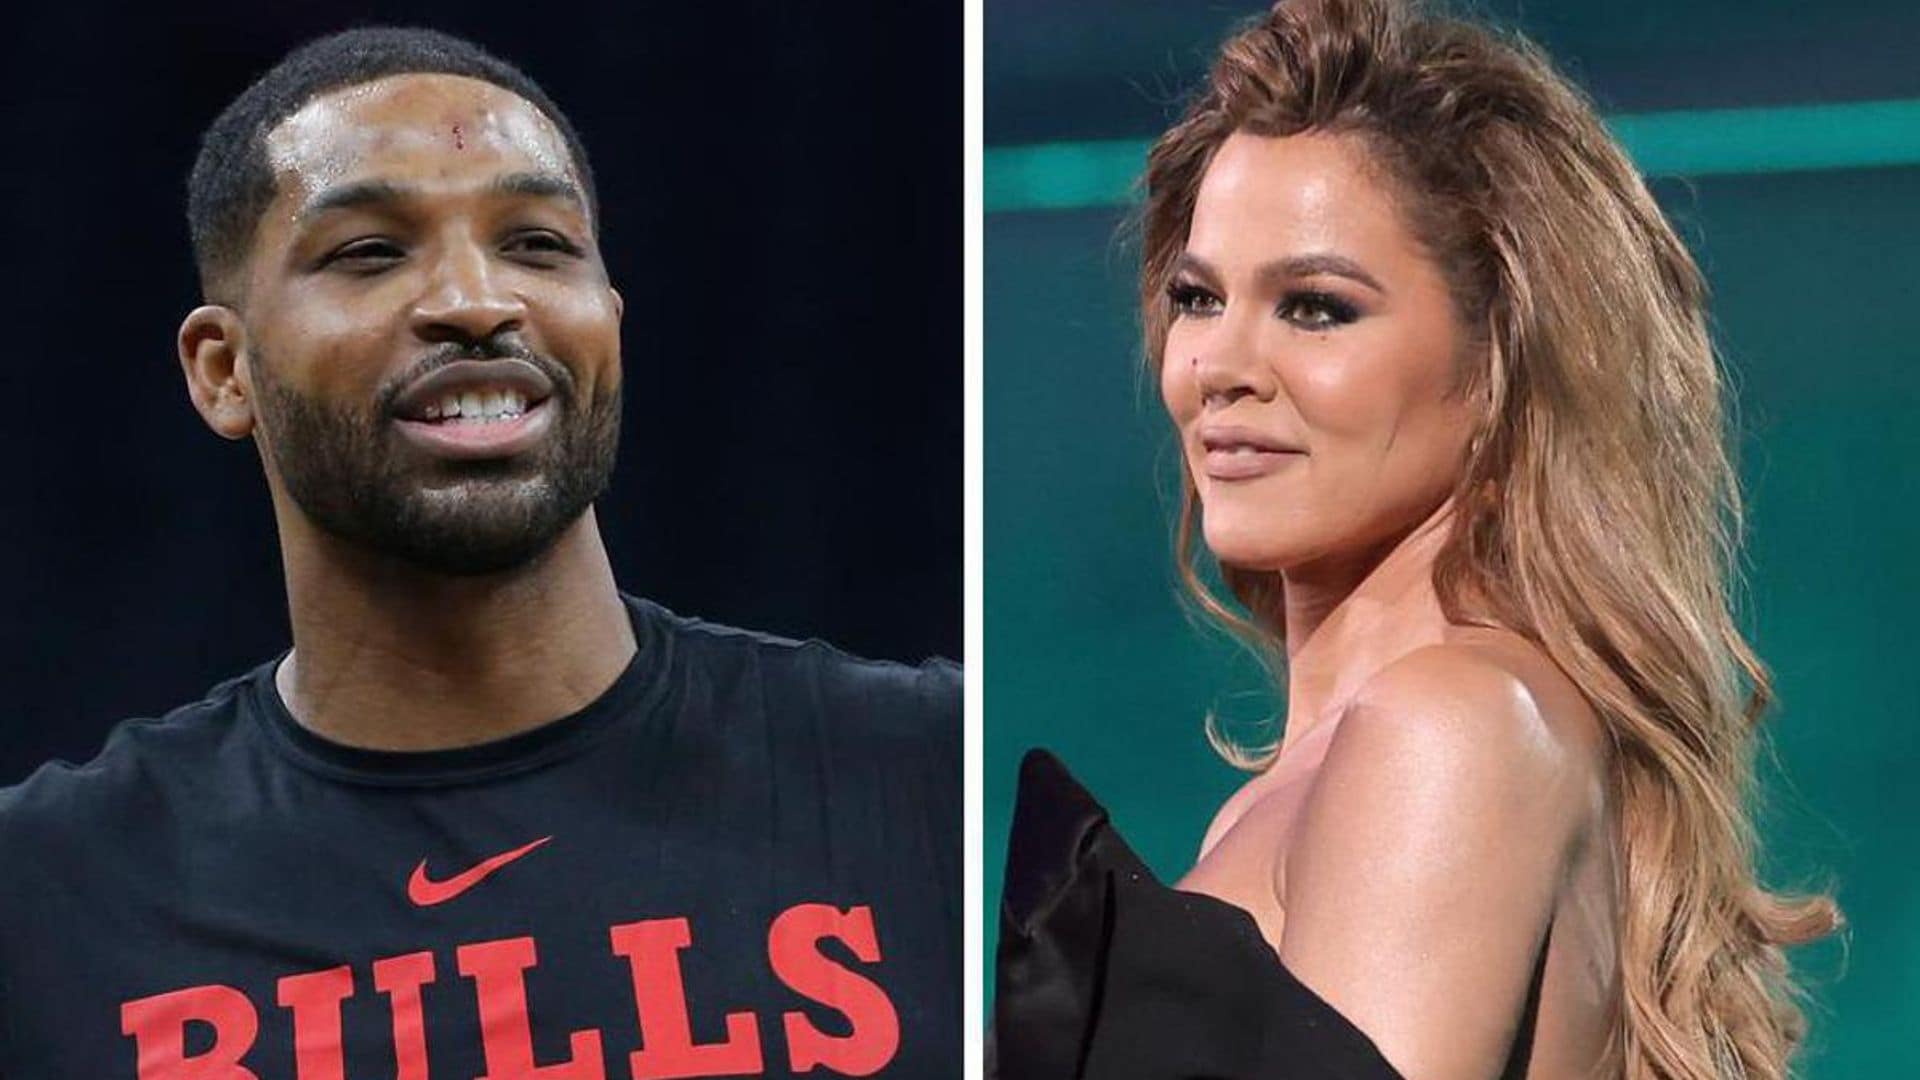 Khloé Kardashian honors her ‘baby daddy’ Tristan Thompson; turns off comments